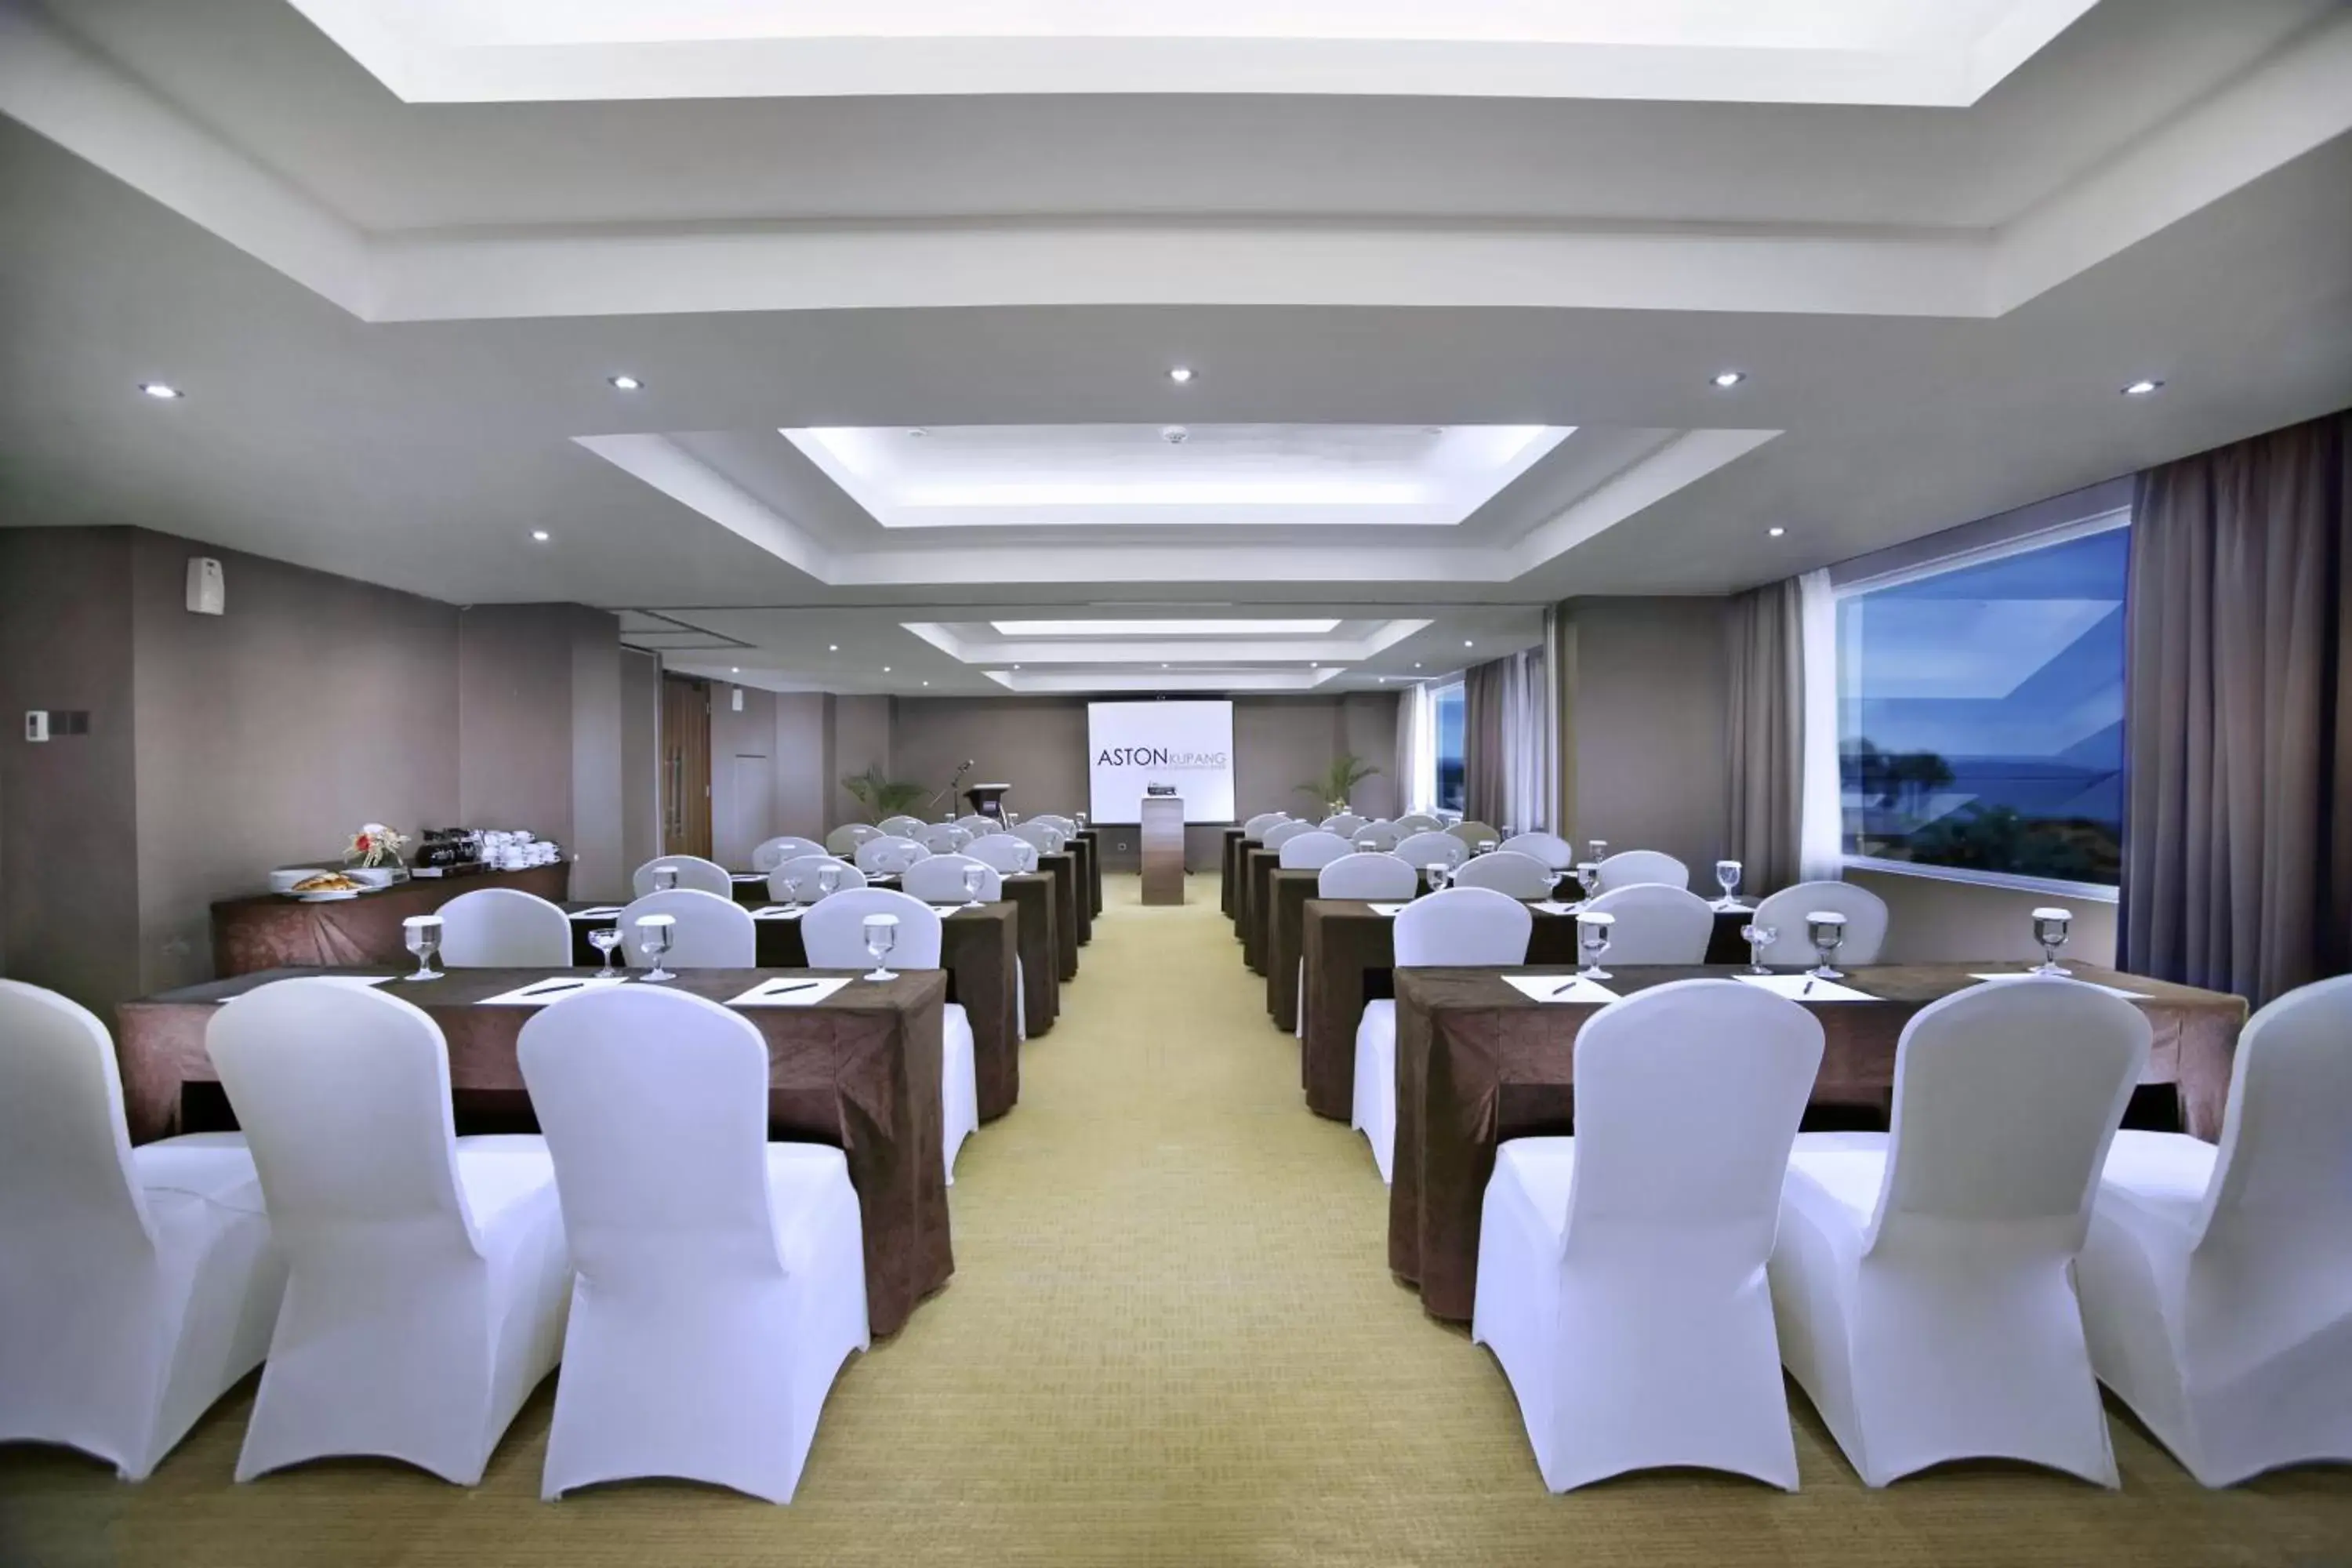 Meeting/conference room, Banquet Facilities in ASTON Kupang Hotel & Convention Center